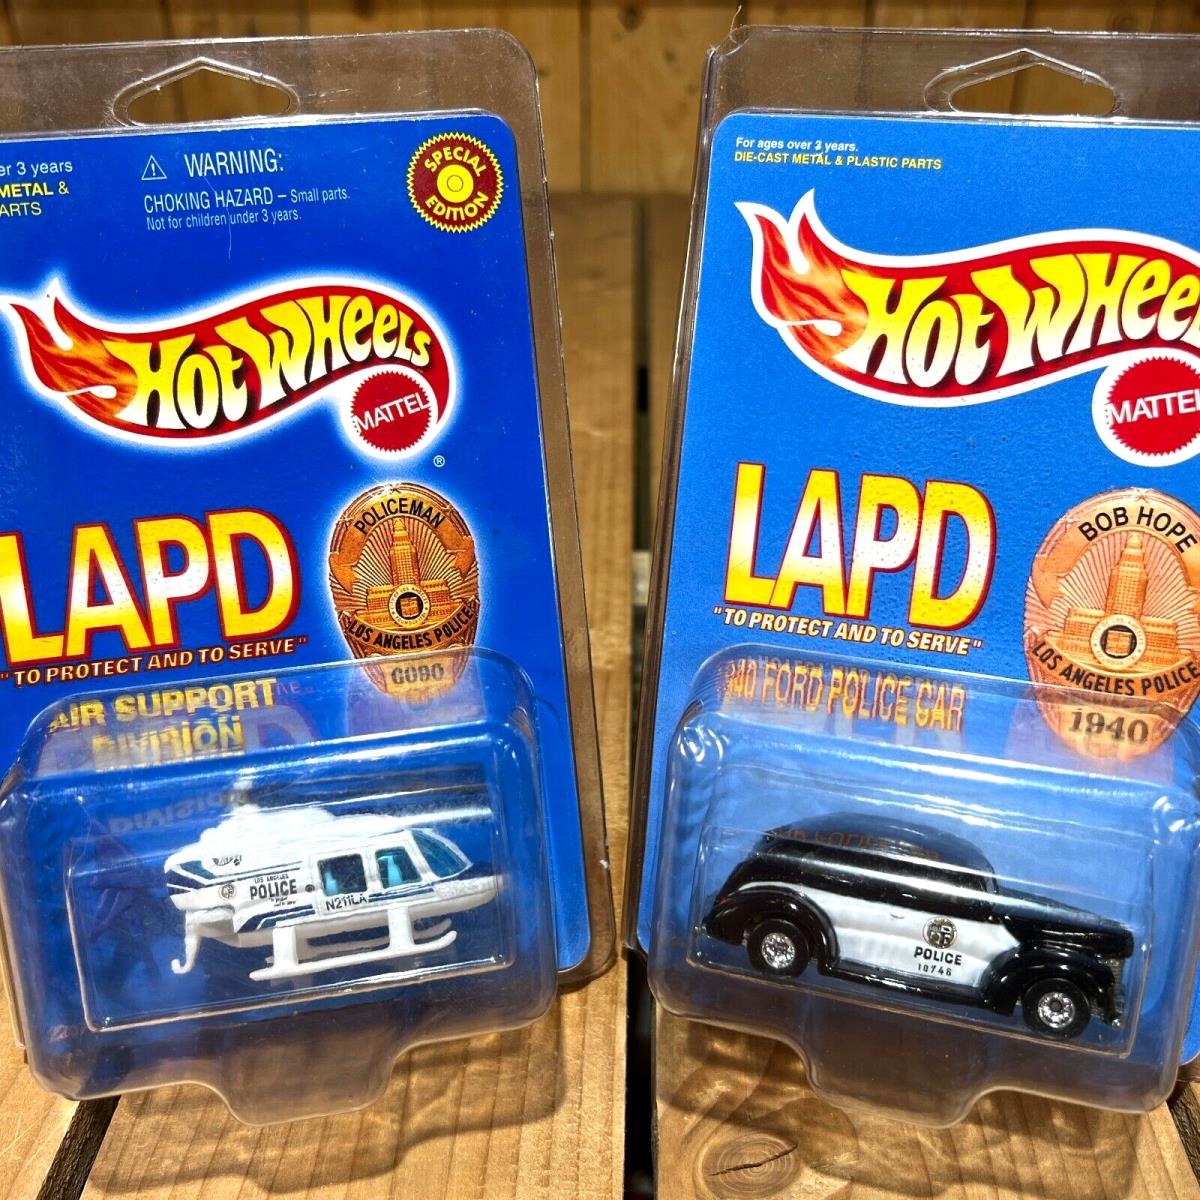 Hot Wheels Lapd 1940 Ford Police Car Helicopter - 1:64 Diecast w/ Protector